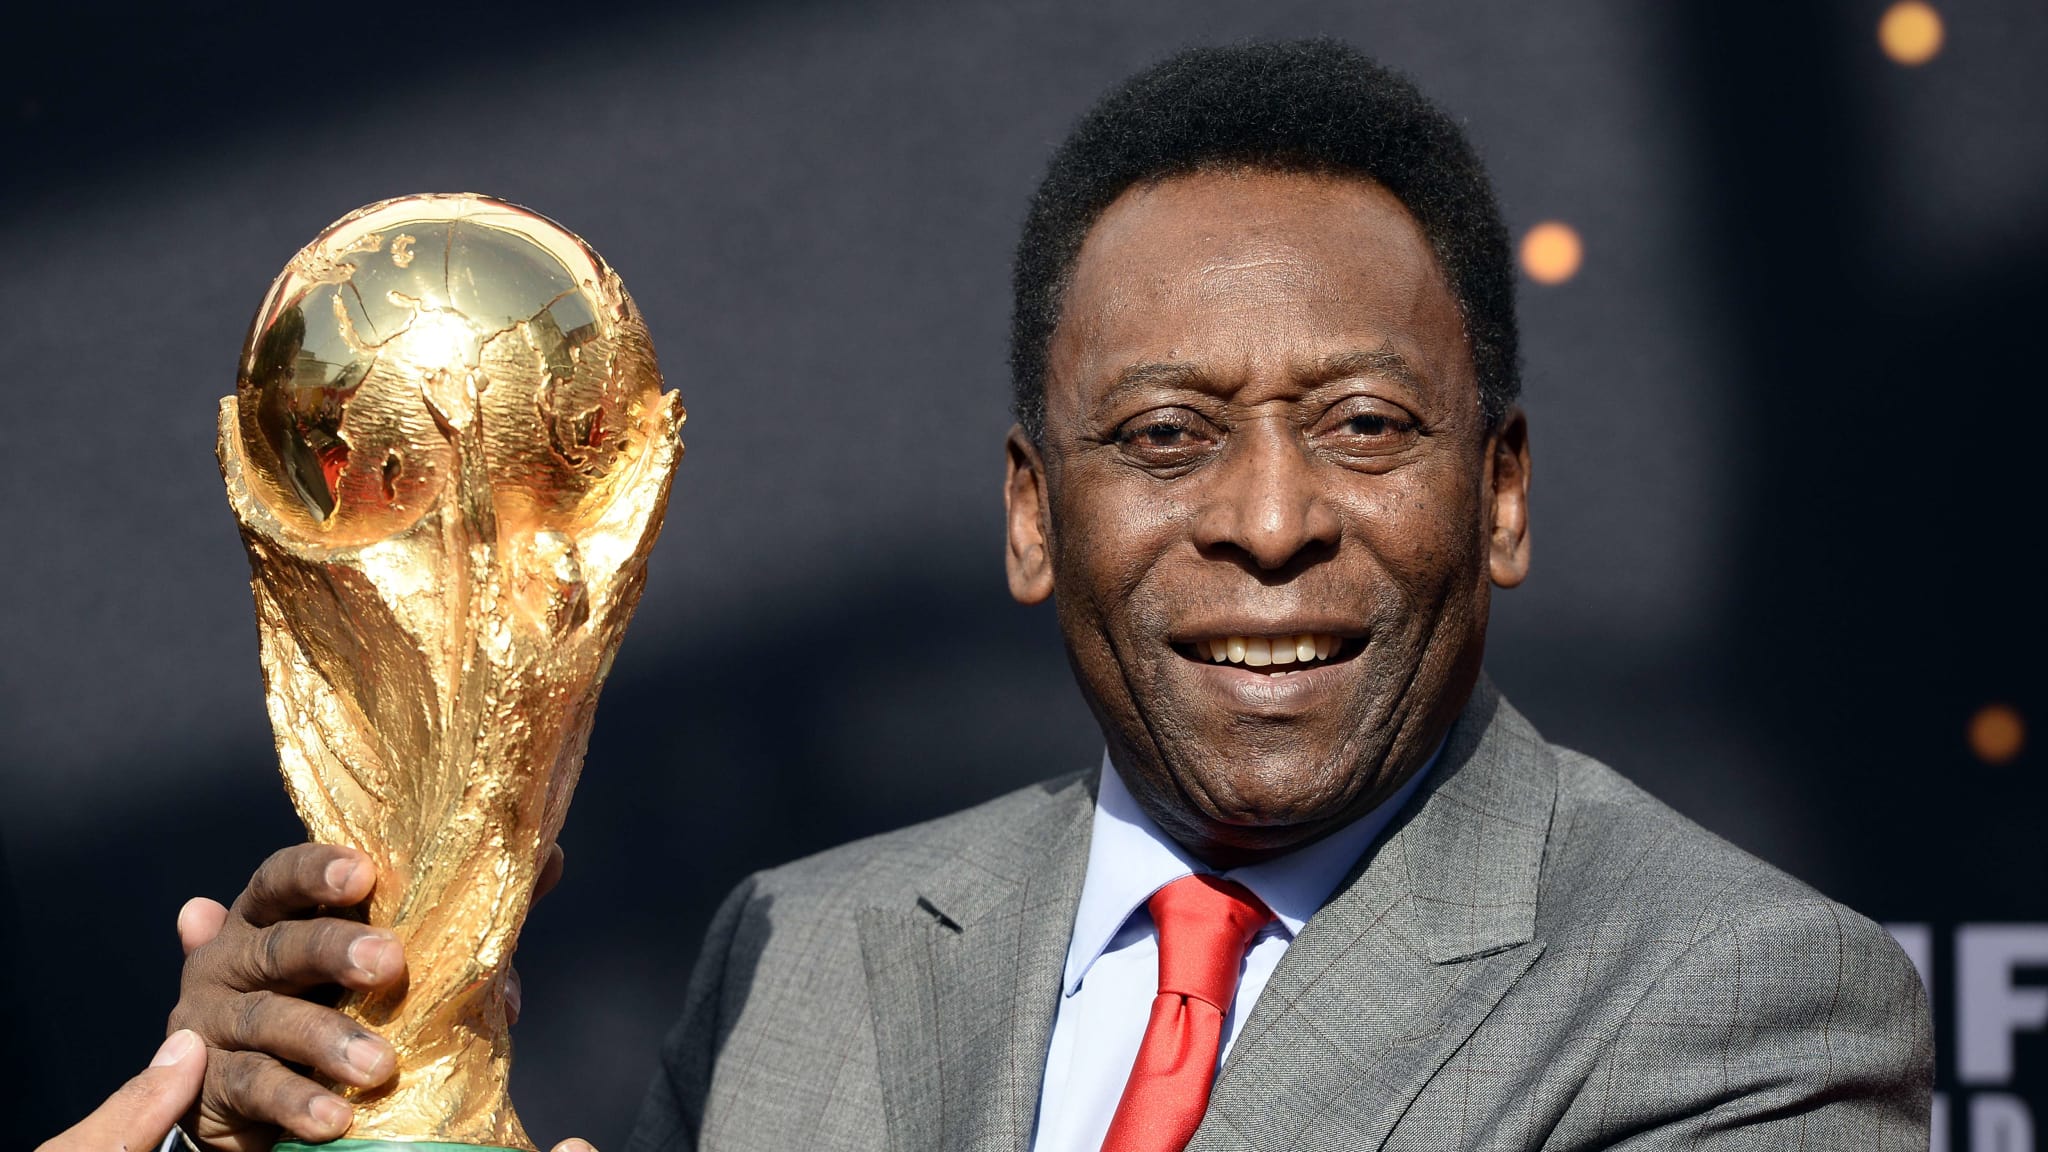 Pele holding the World Cup trophy